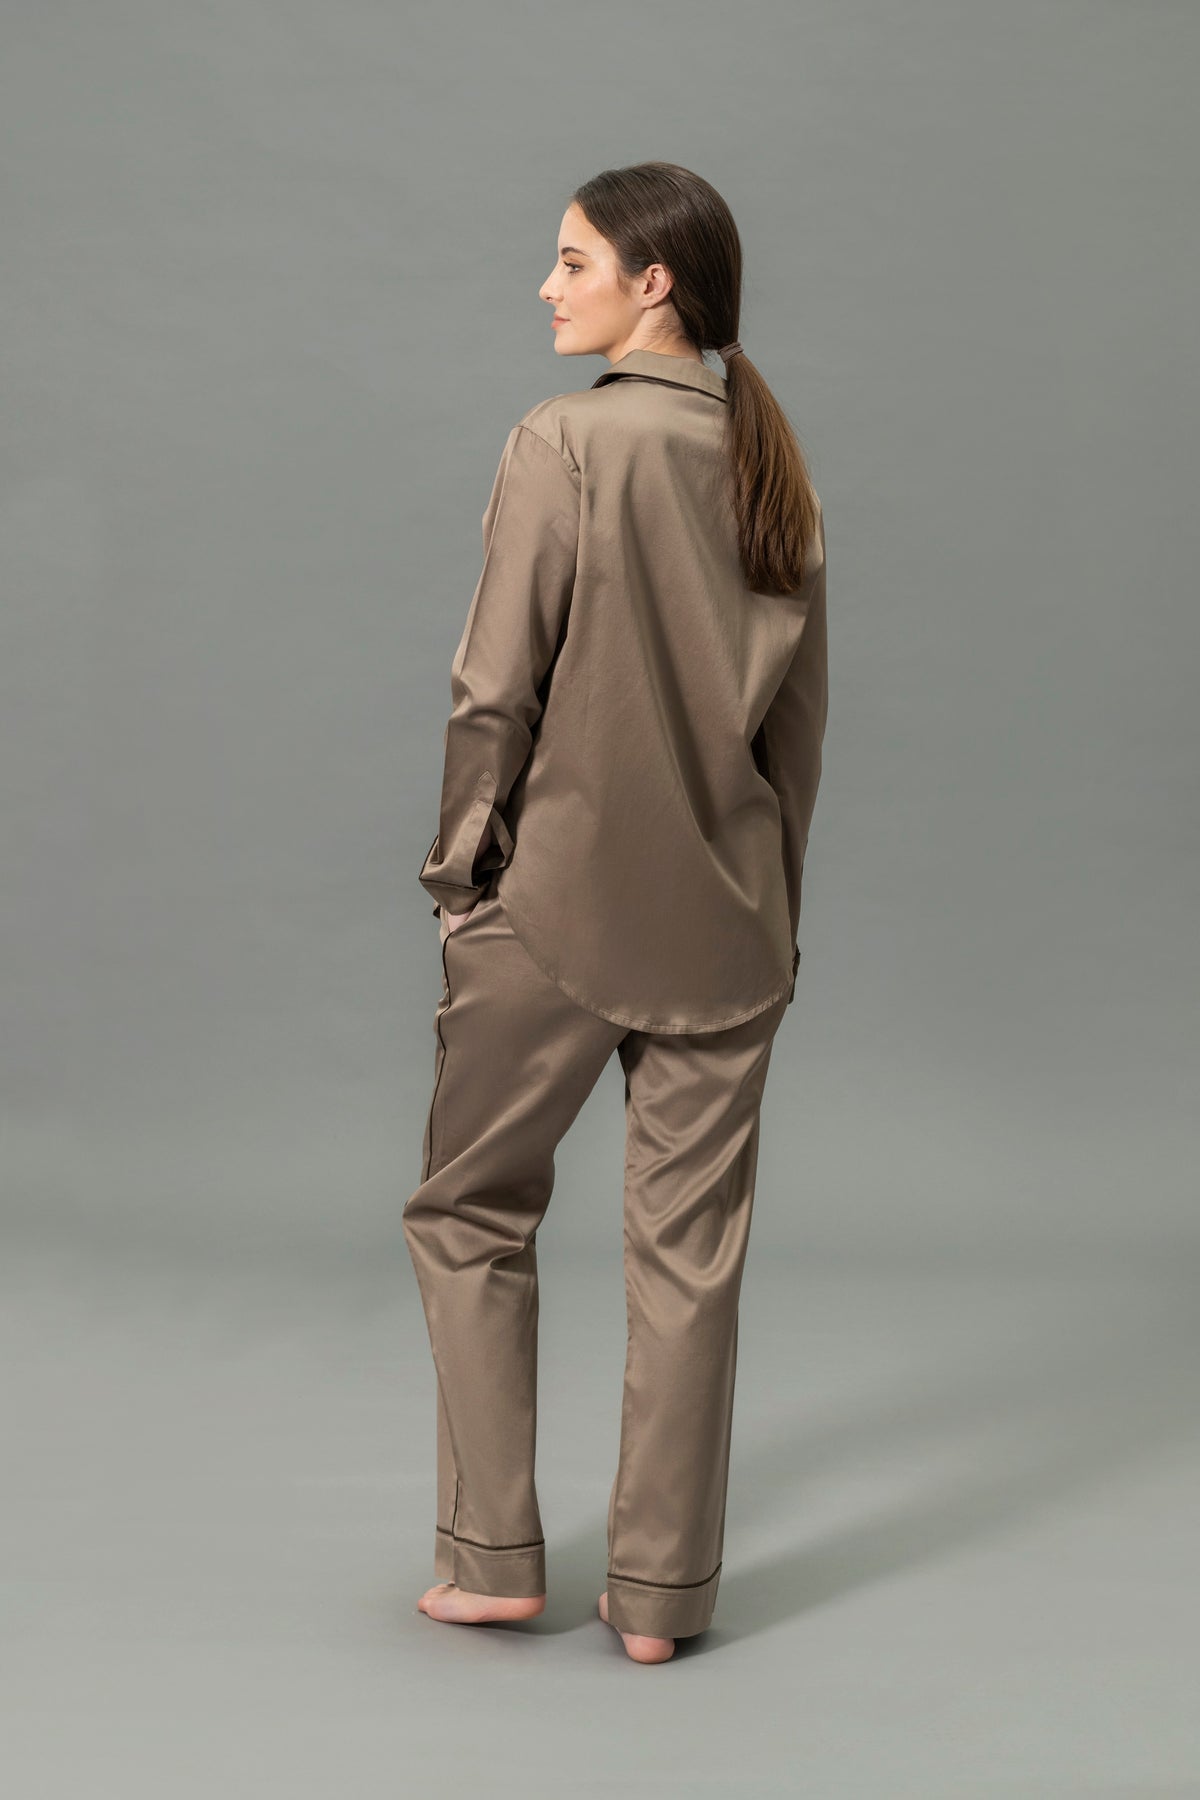 Back View of Model Wearing Matouk Nocturne Pajama Set in Color Mocha and Sable